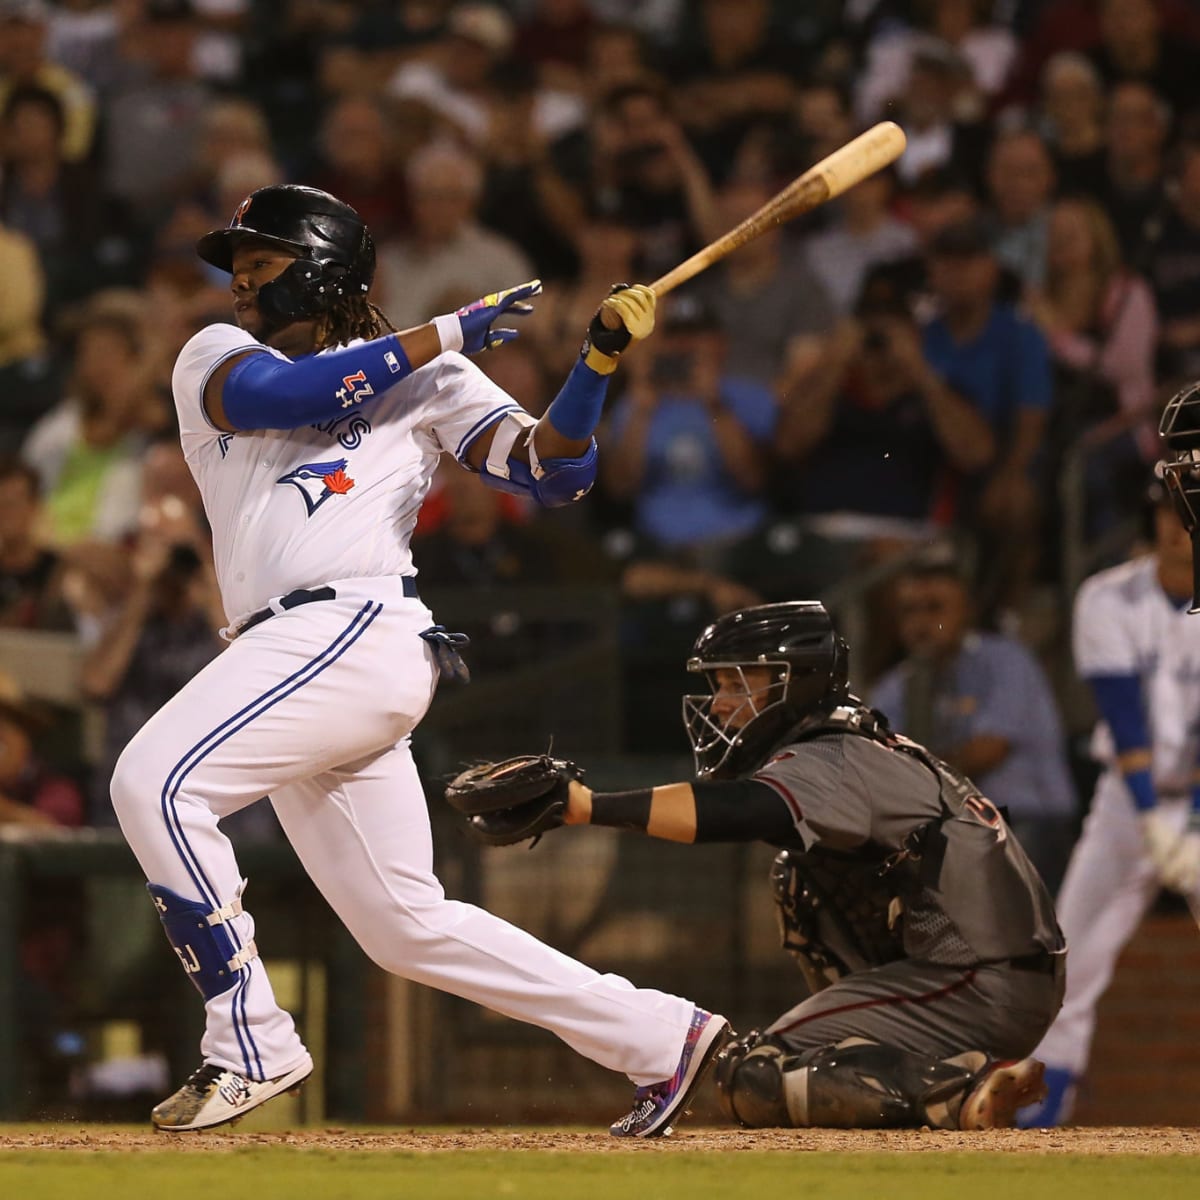 Like father, like son: Vlad Guerrero Jr. shines as All-Star - The